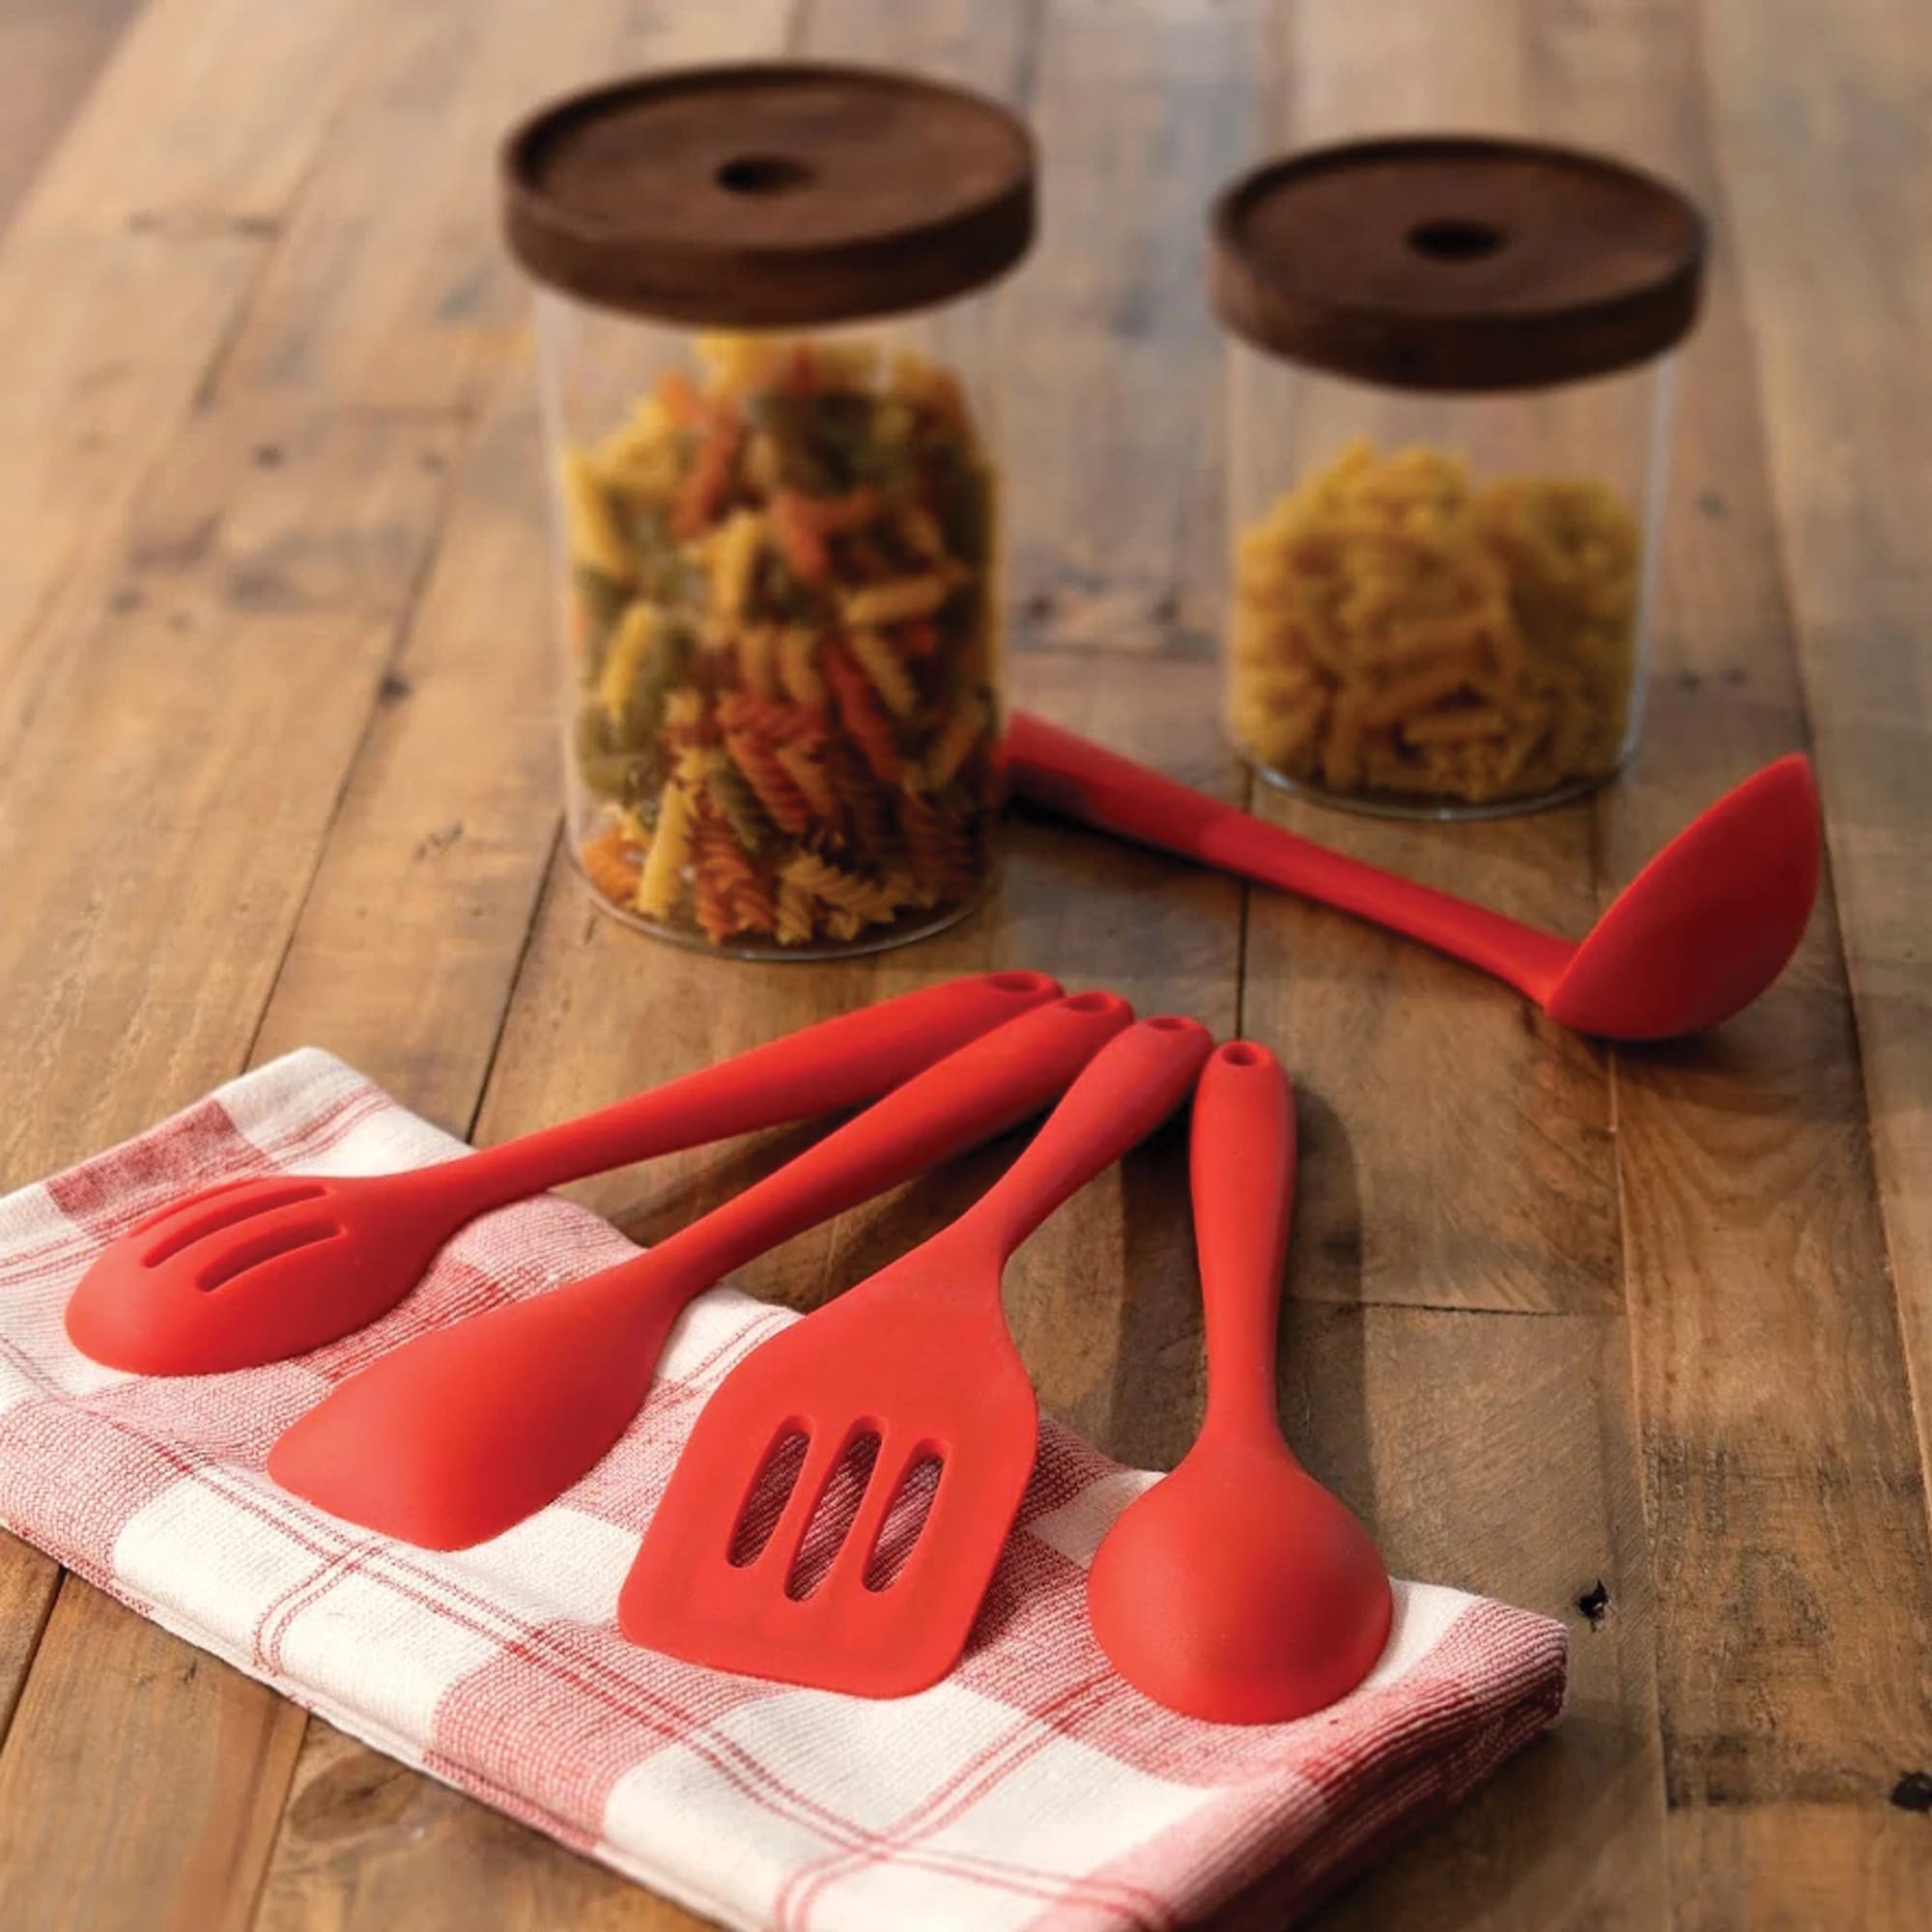 Silicone Kitchen Utensils Set with Holder - Heat Resistant Cooking Utensils Set for Nonstick Cookware,Wooden Handle Soup Spoon Kitchen Utensil Set 5pc